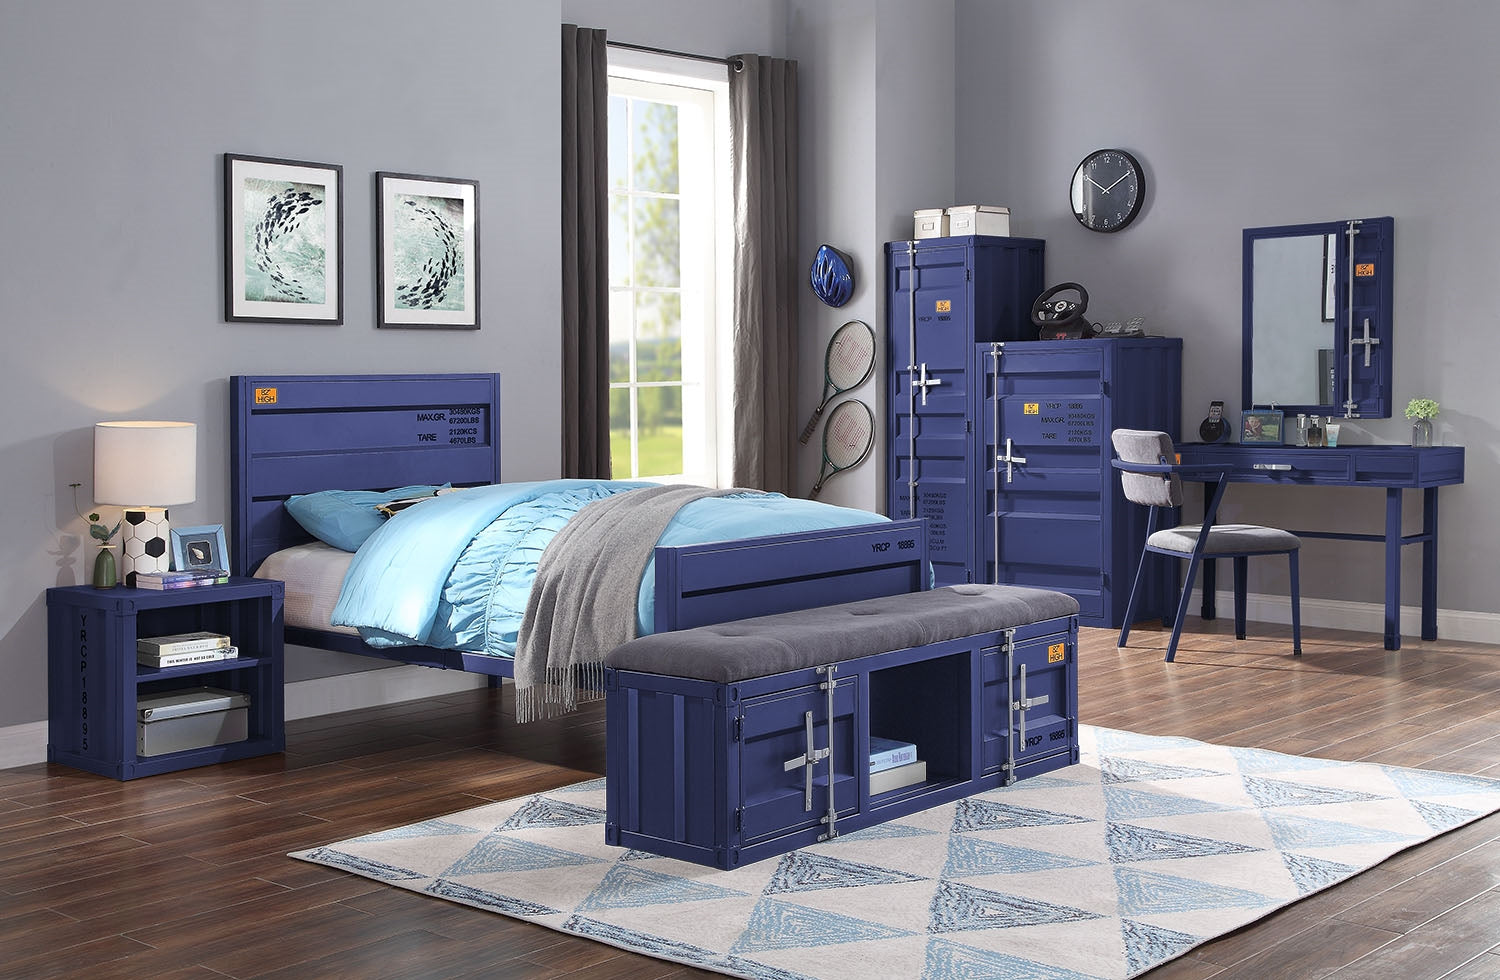 Cargo Container Theme Twin Bed - ACME 35930